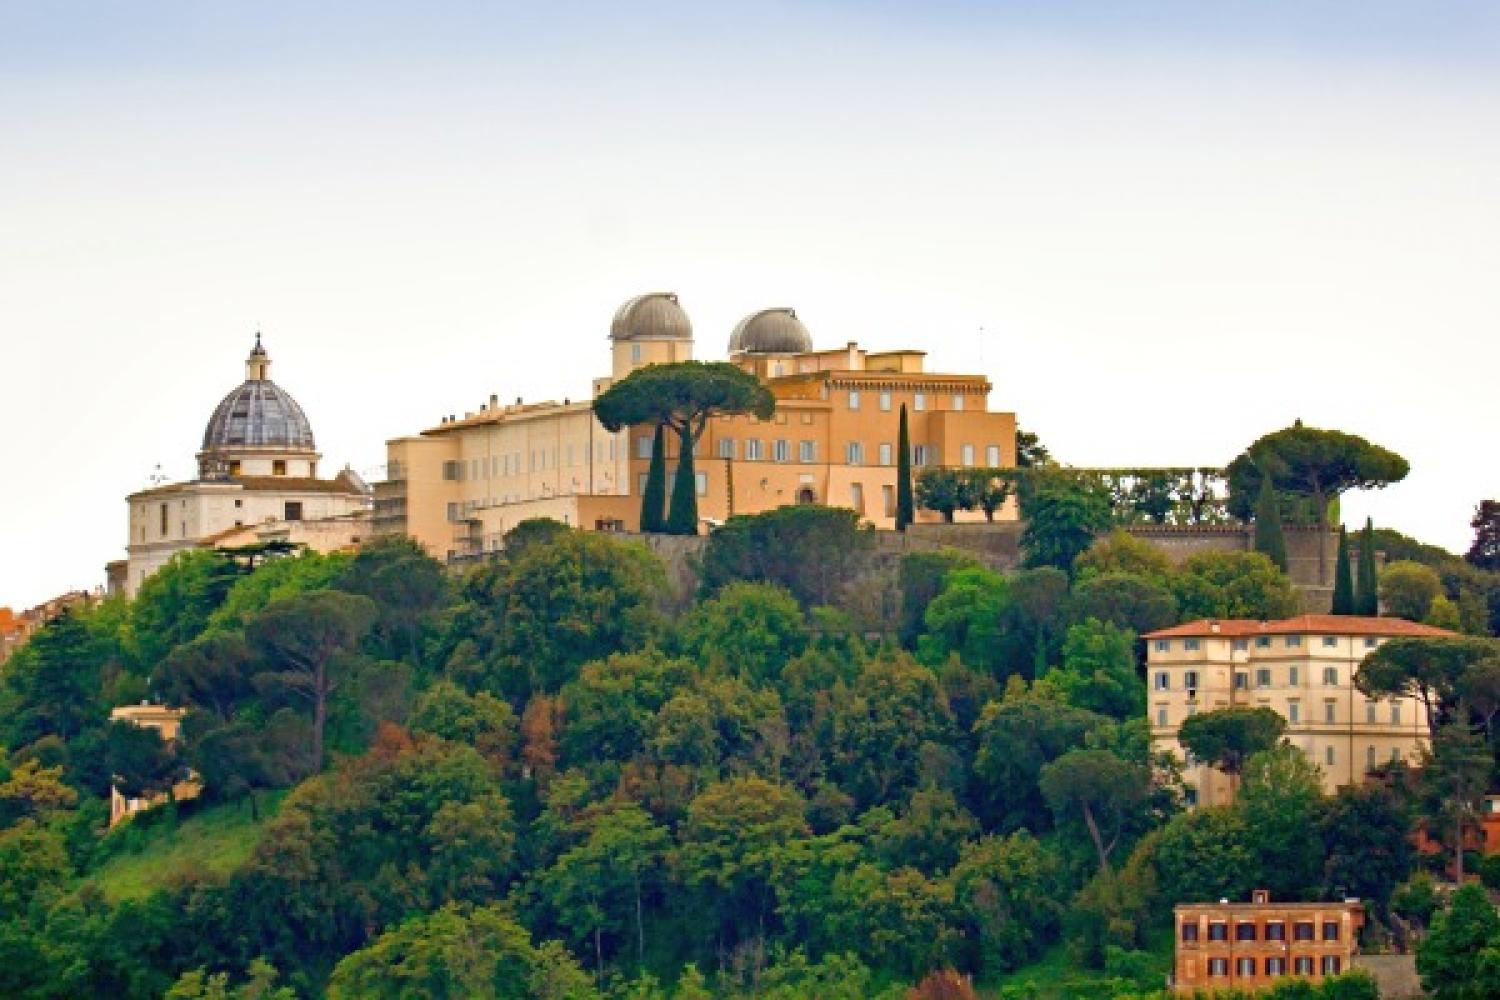 The palace and observatory of Castel Gandolfo